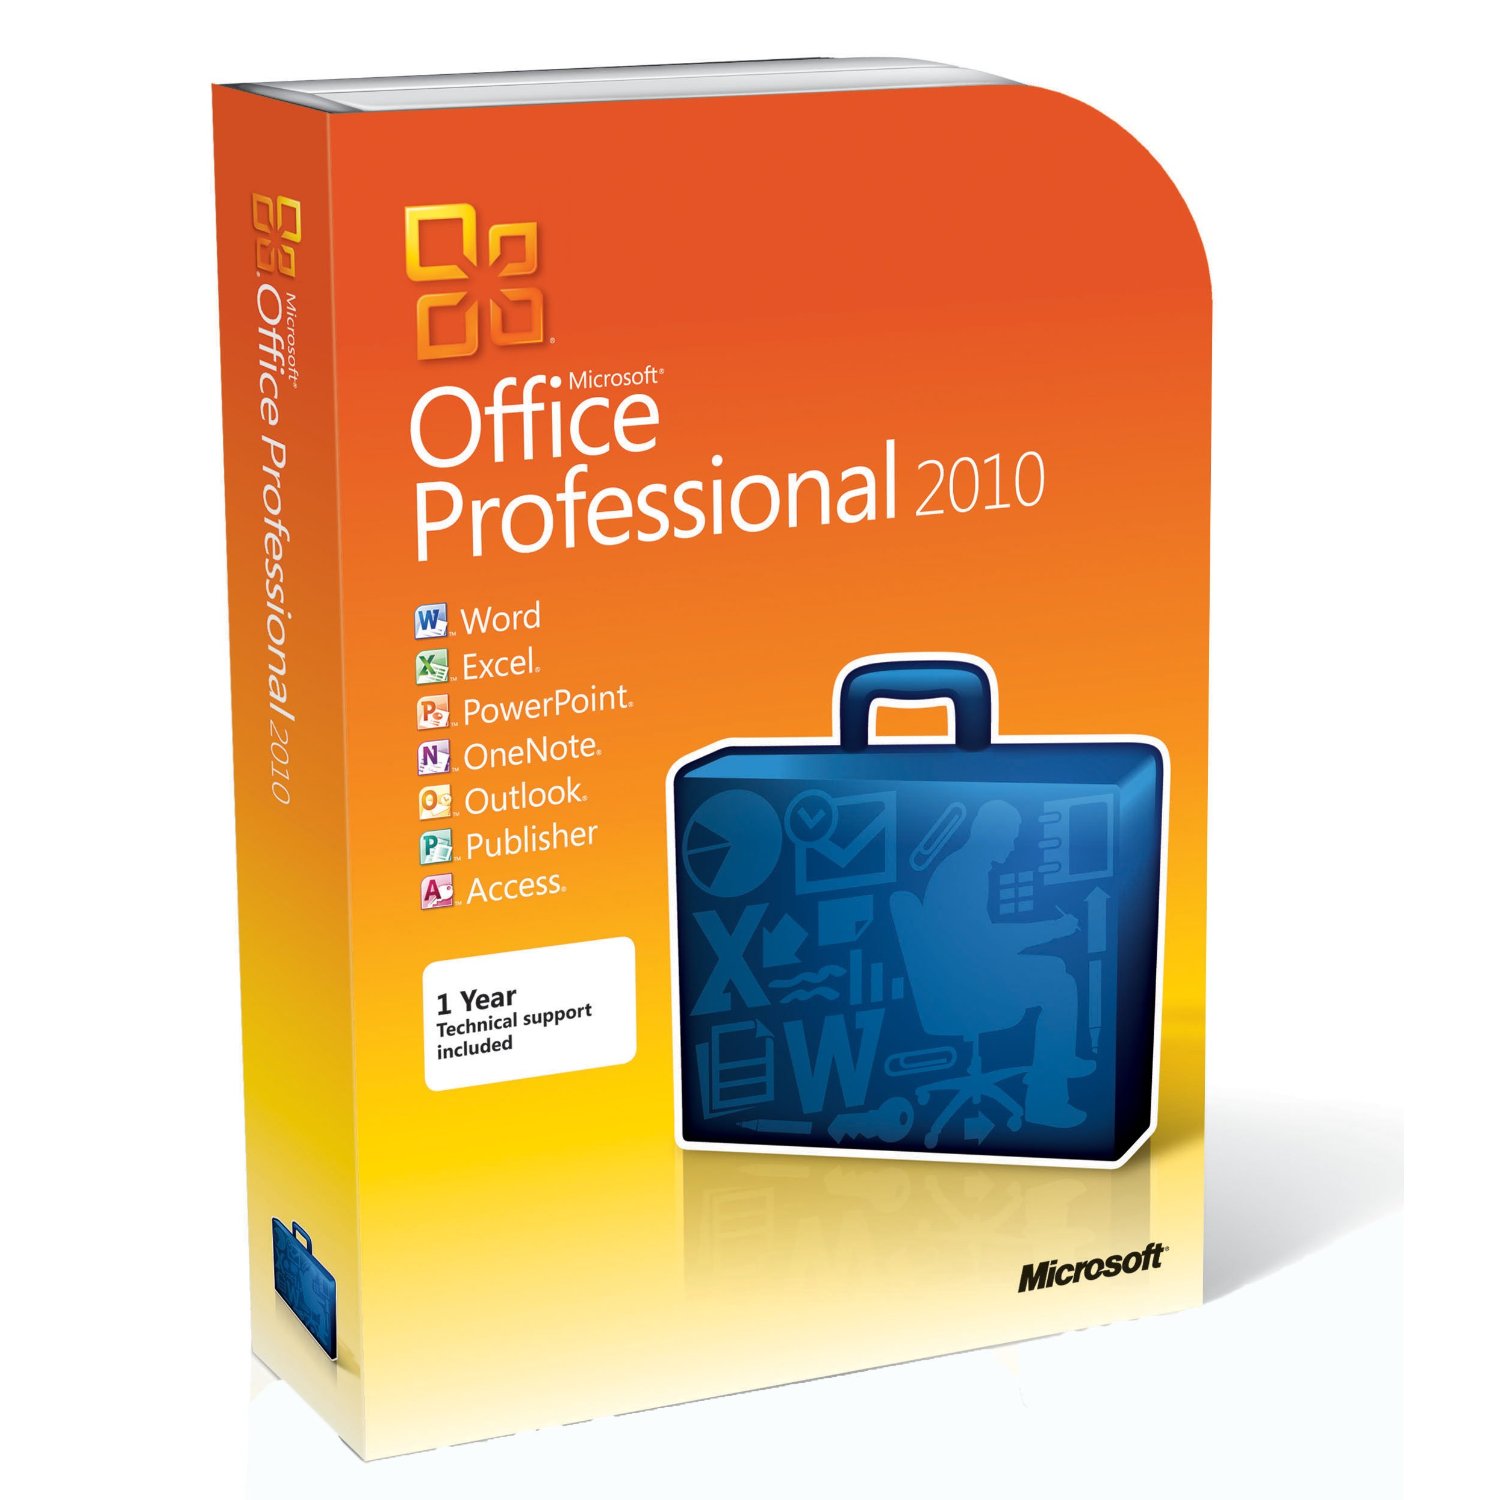 Microsoft Office Project Professional 2010 price